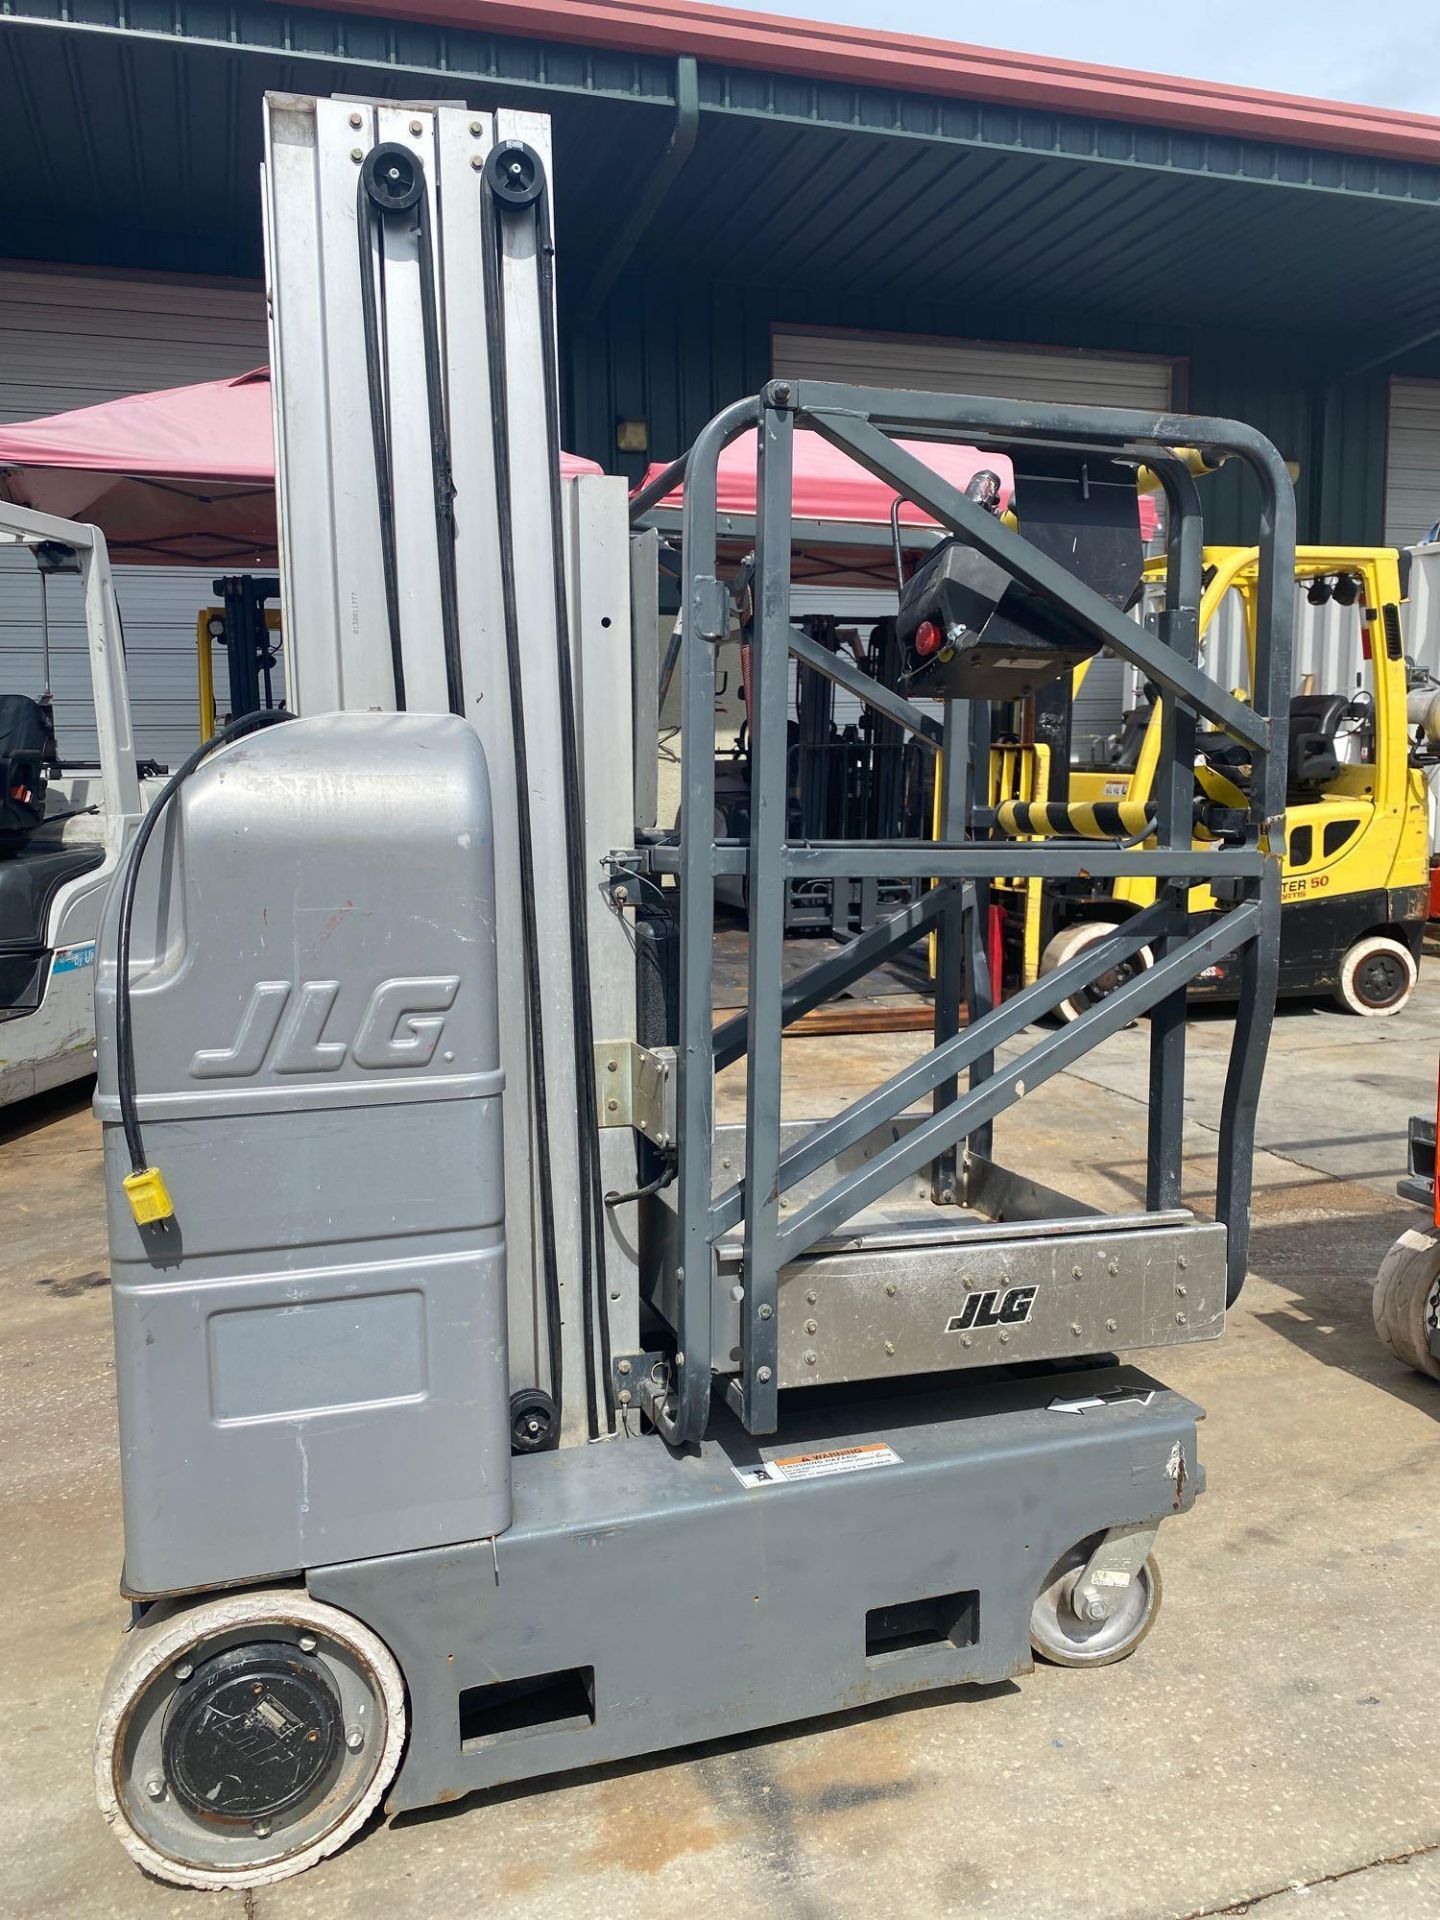 JLG 20MVL ELECTRIC MAN LIFT, BUILT IN BATTERY CHARGER, 20' PLATFORM HEIGHT, SELF PROPELLED, RUNS AND